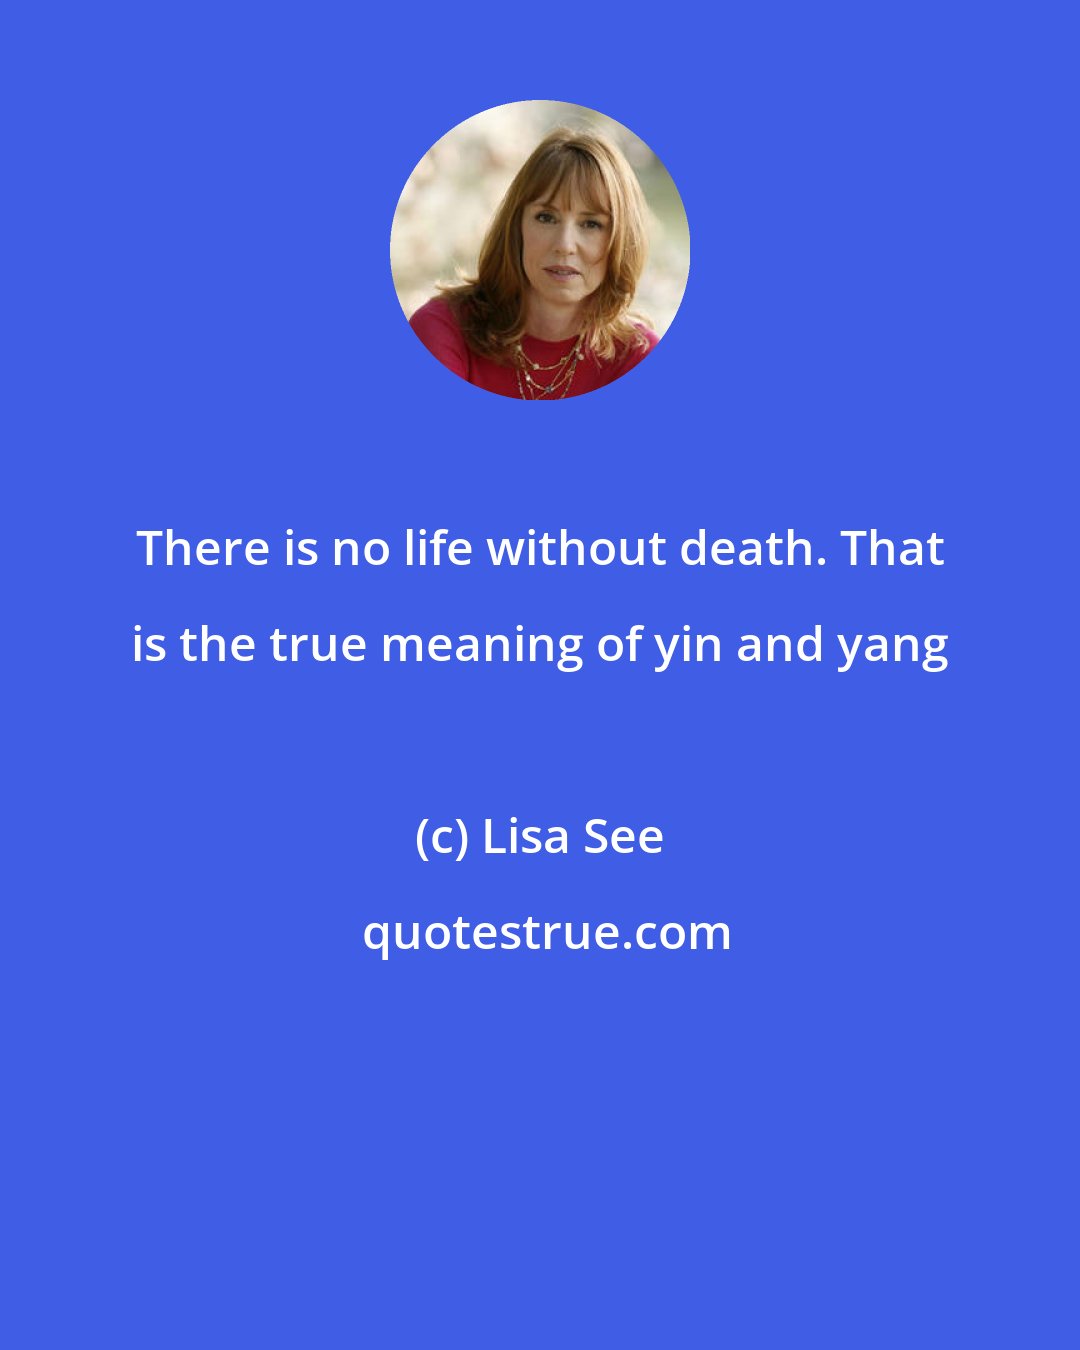 Lisa See: There is no life without death. That is the true meaning of yin and yang